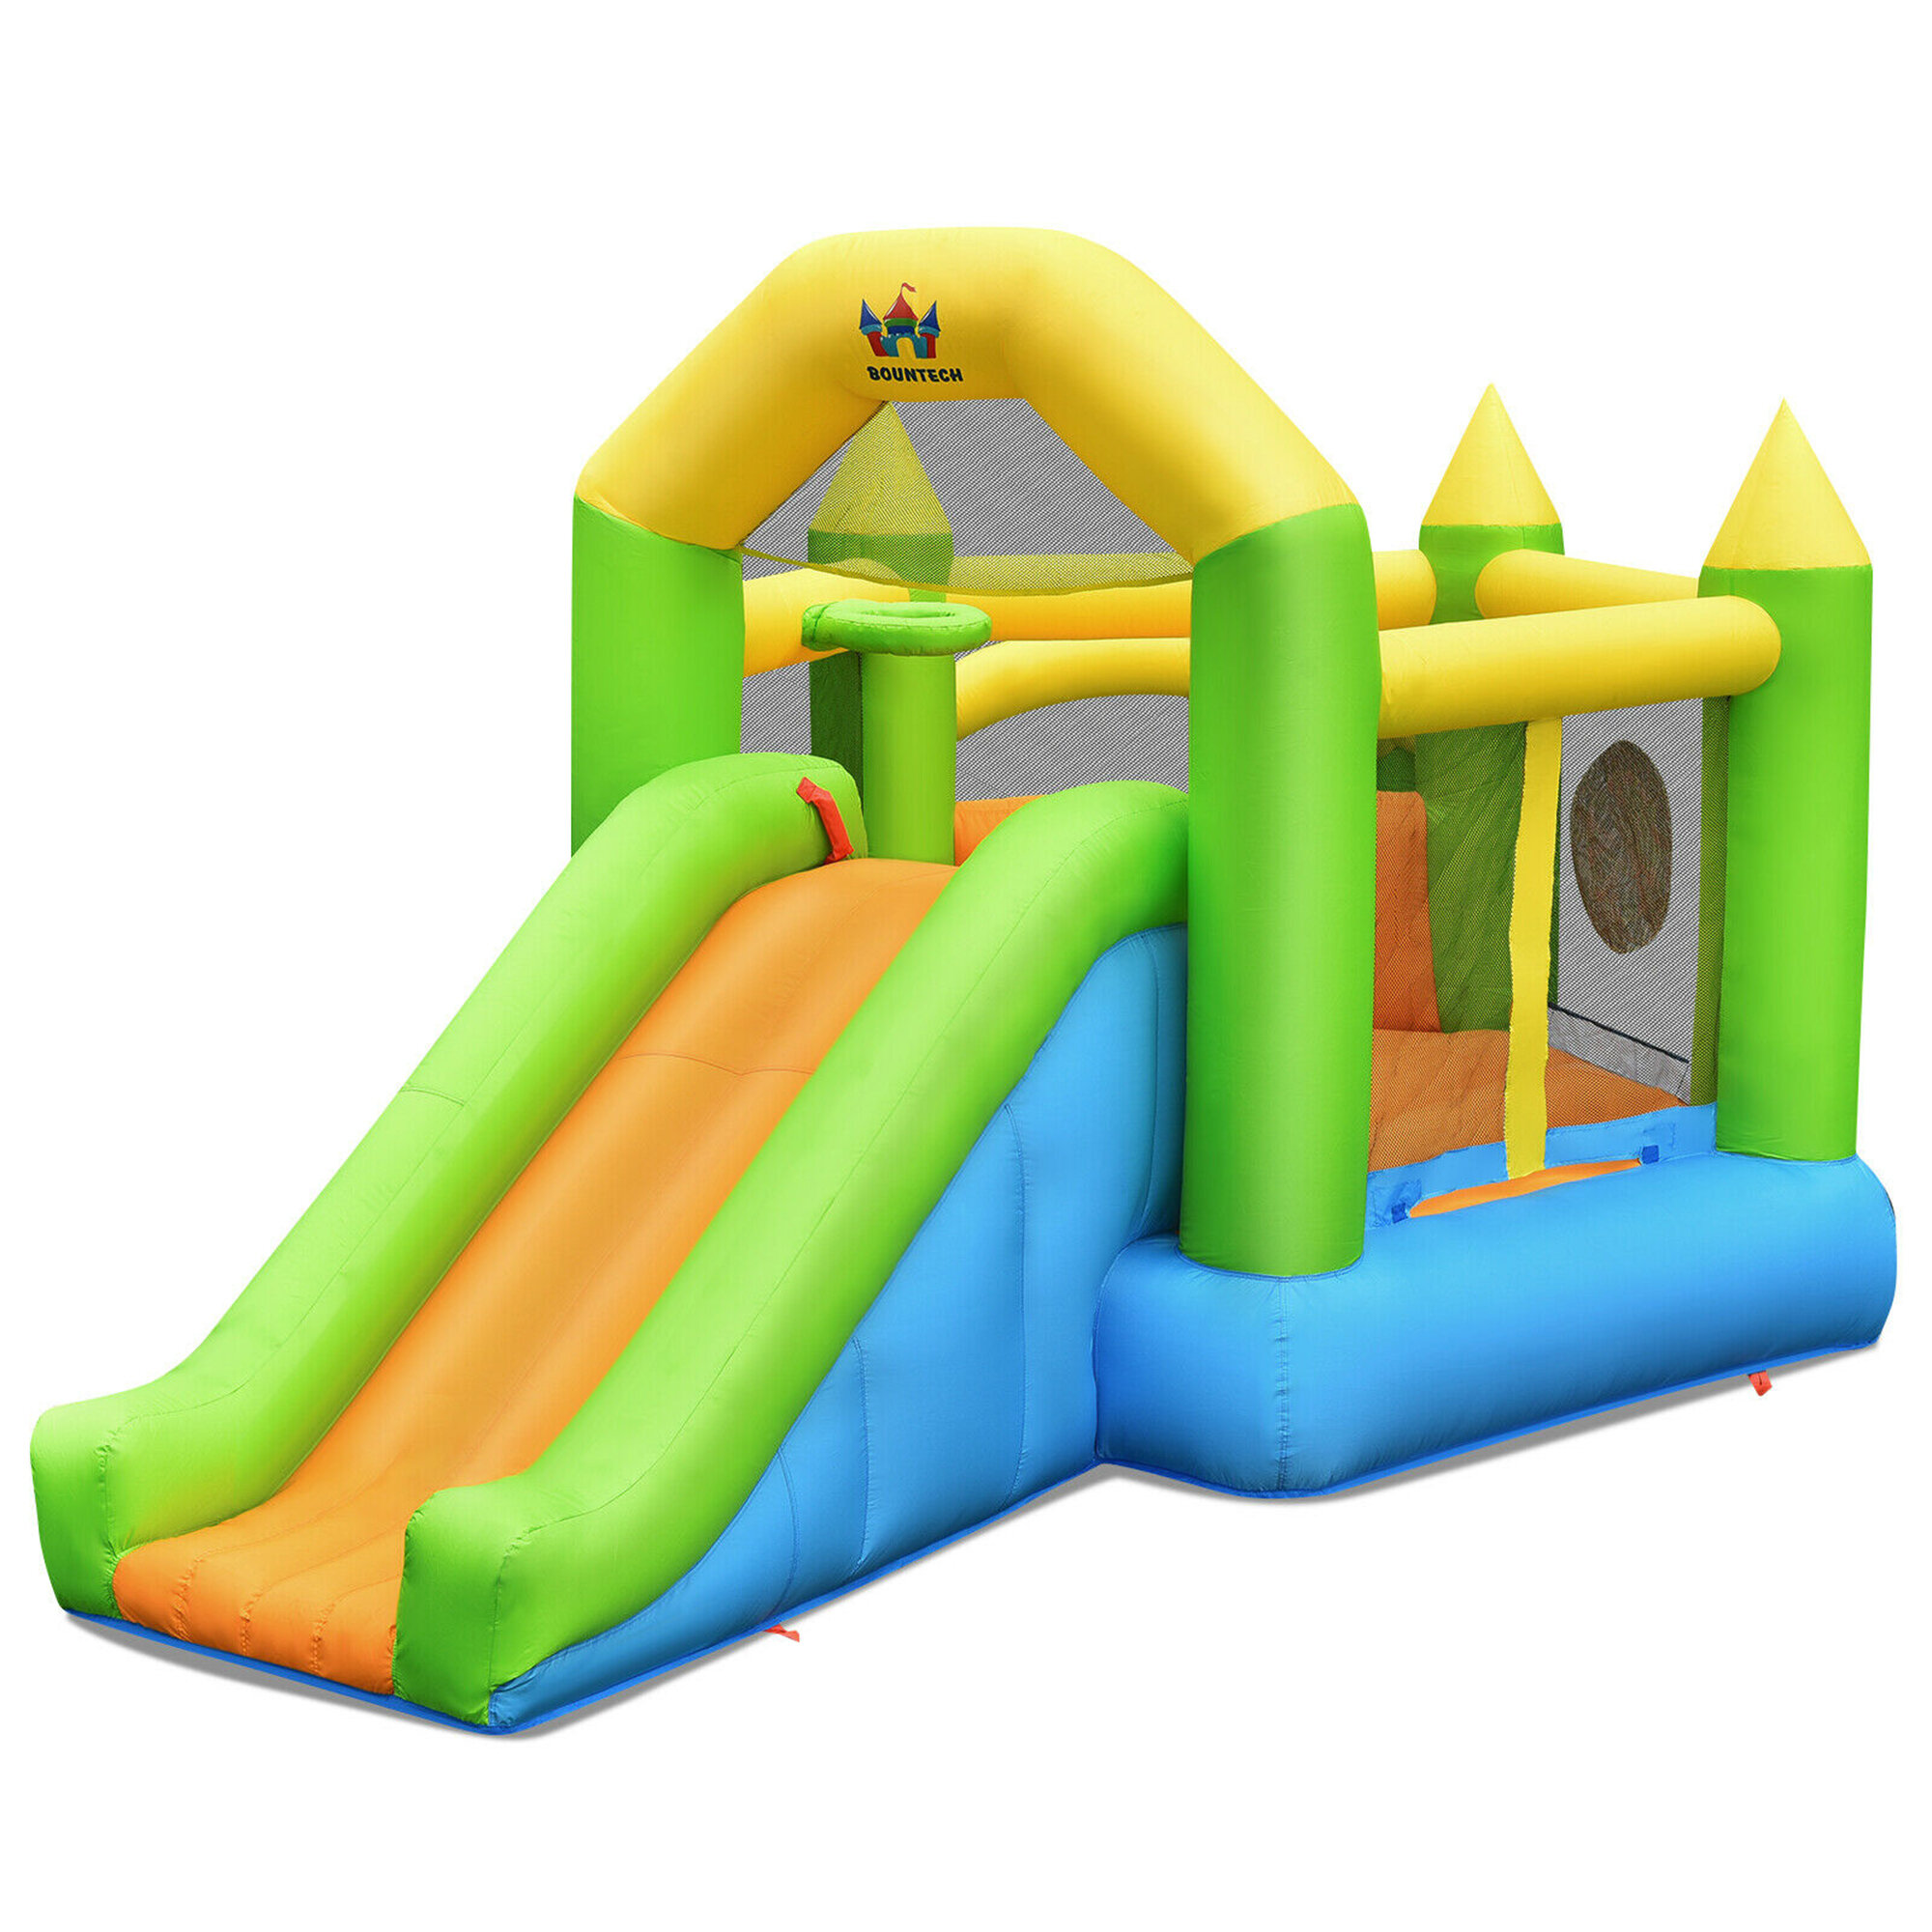 Outdoor Inflatable Kids Bounce House Bouncy Playhouse Jumper Castle & Slide 